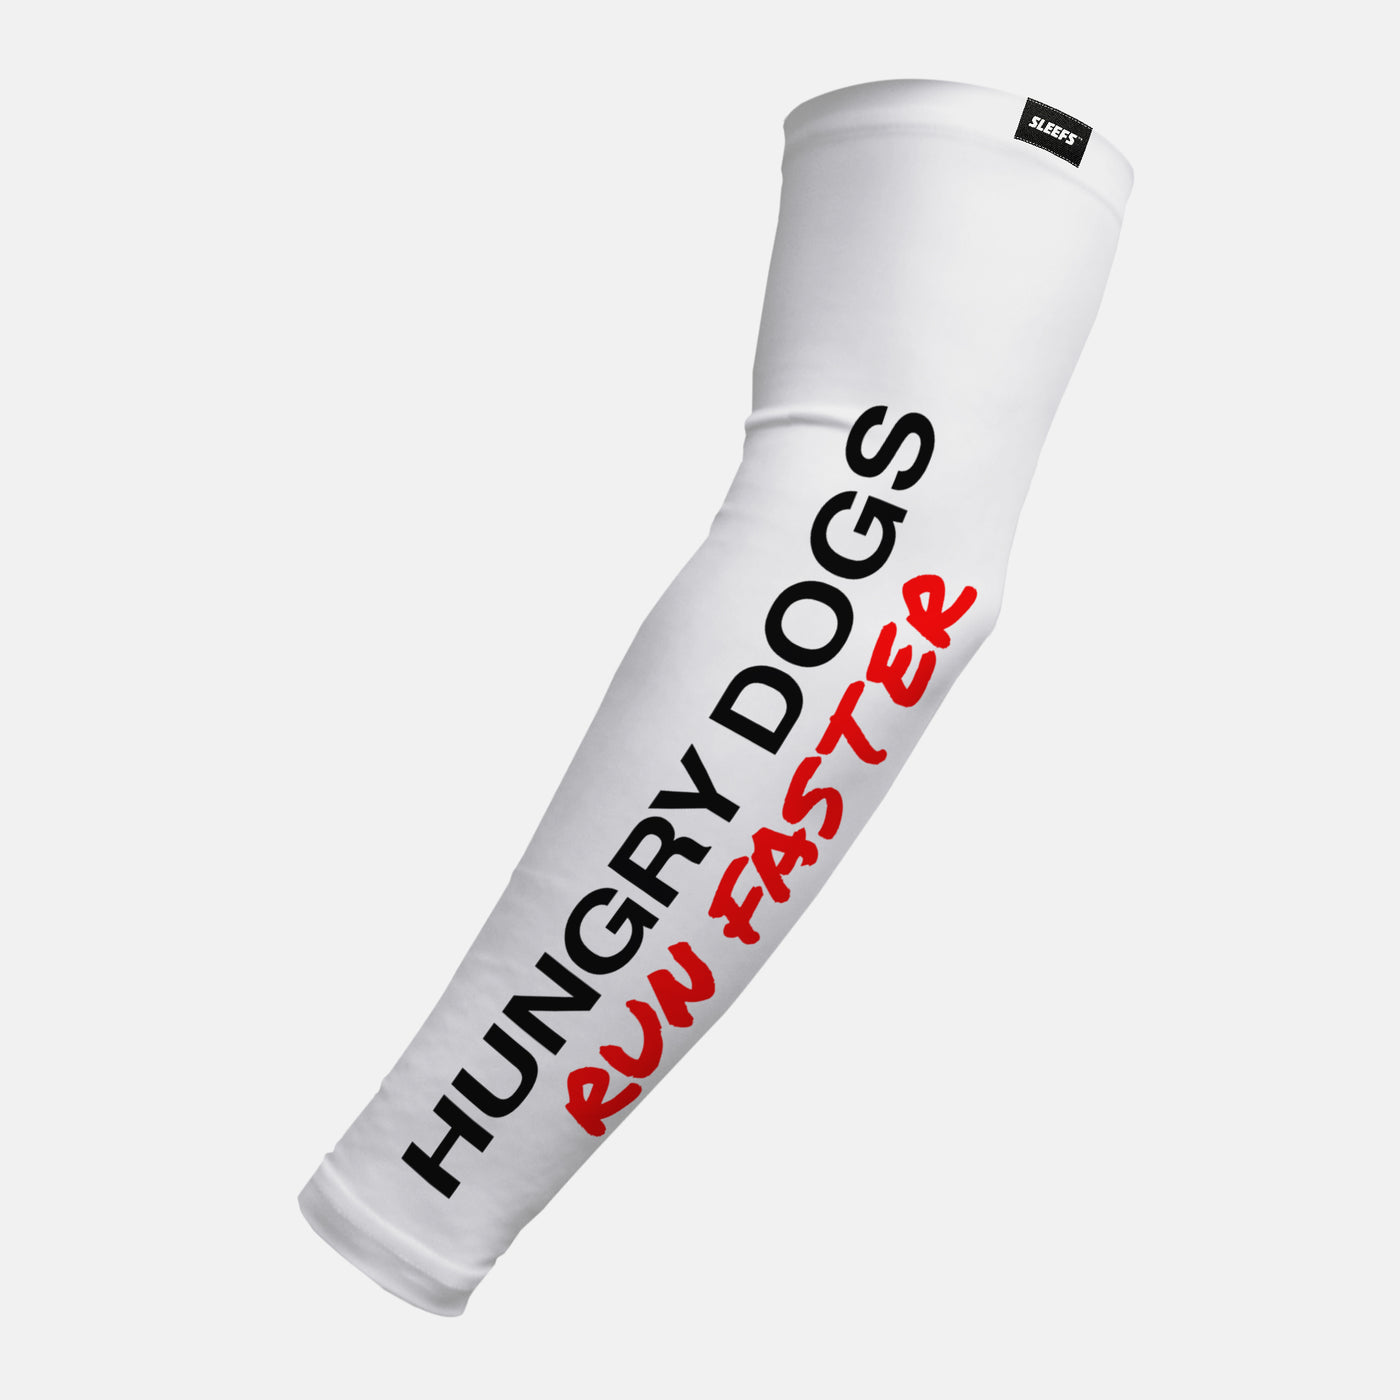 Hungry Dogs Run Faster Arm Sleeve